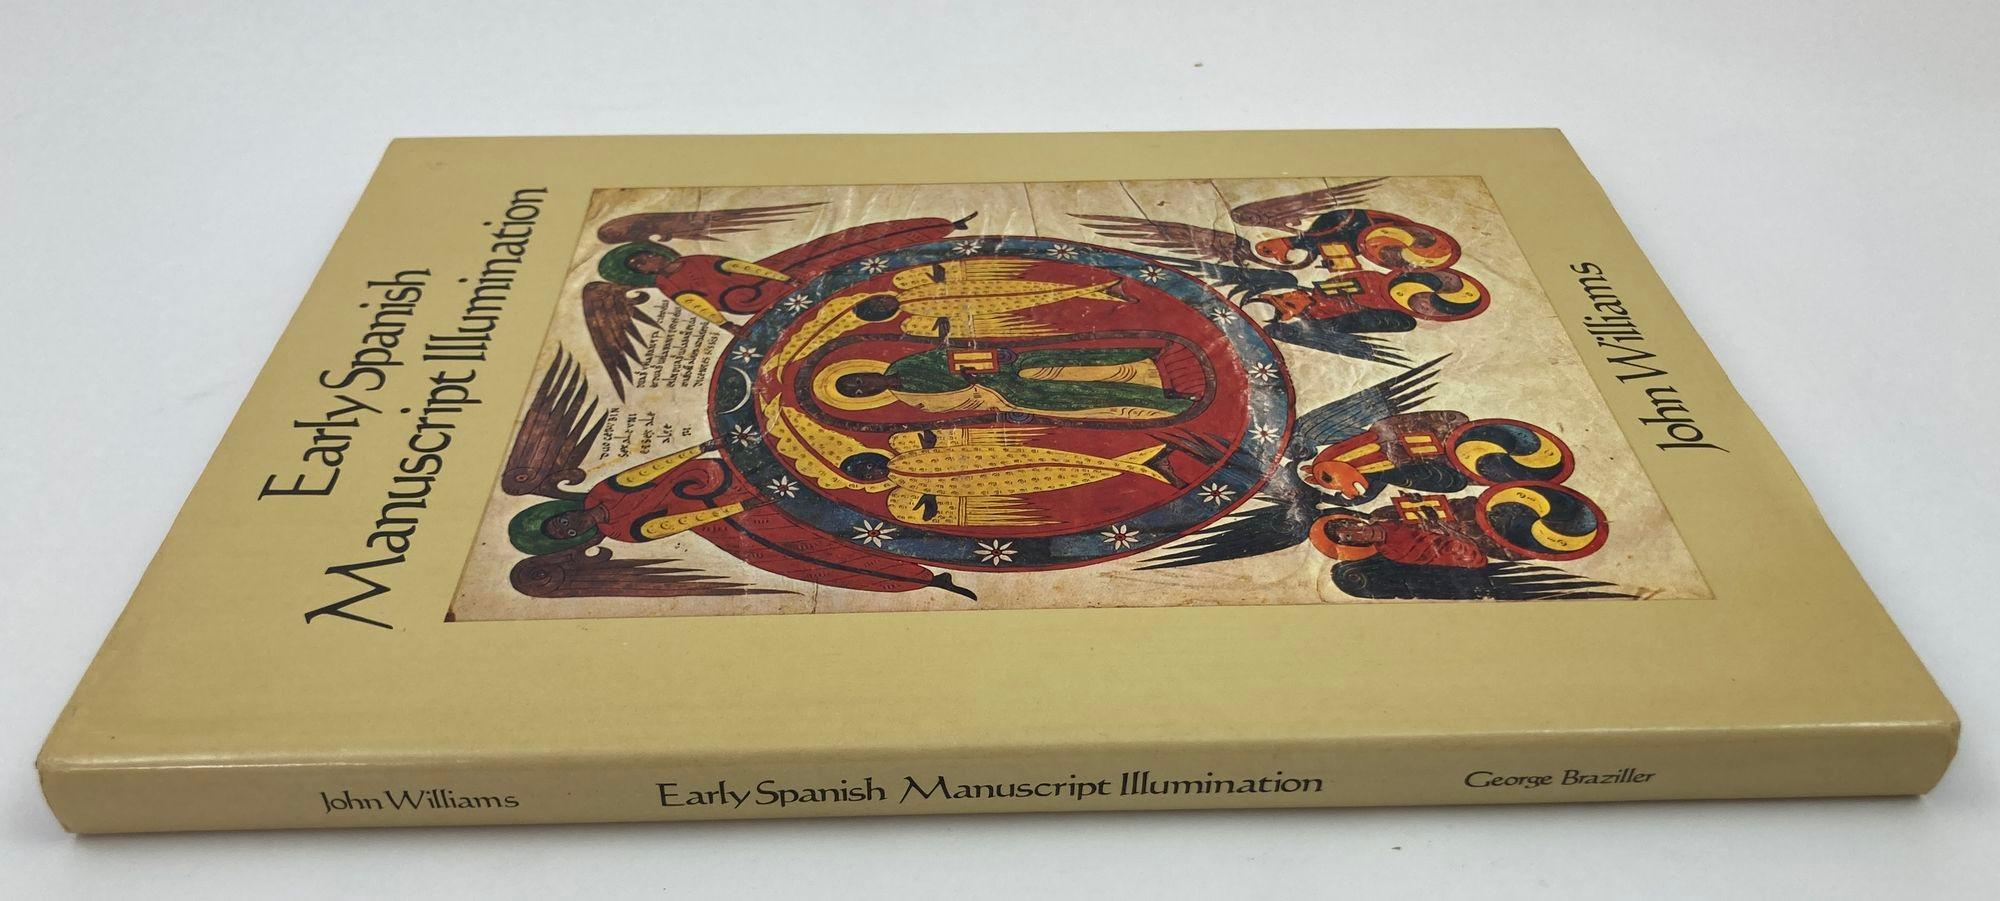 Early Spanish Manuscript Illumination Paperback – January 1, 1977.
* Publisher ‏ : ‎ George Braziller (January 1, 1977)
* Language ‏ : ‎ English
* Paperback ‏ : ‎ 119 pages
* Item Weight ‏ : ‎ 1.15 pounds
* Dimensions ‏ : ‎ 8 x 0.5 x 11.25